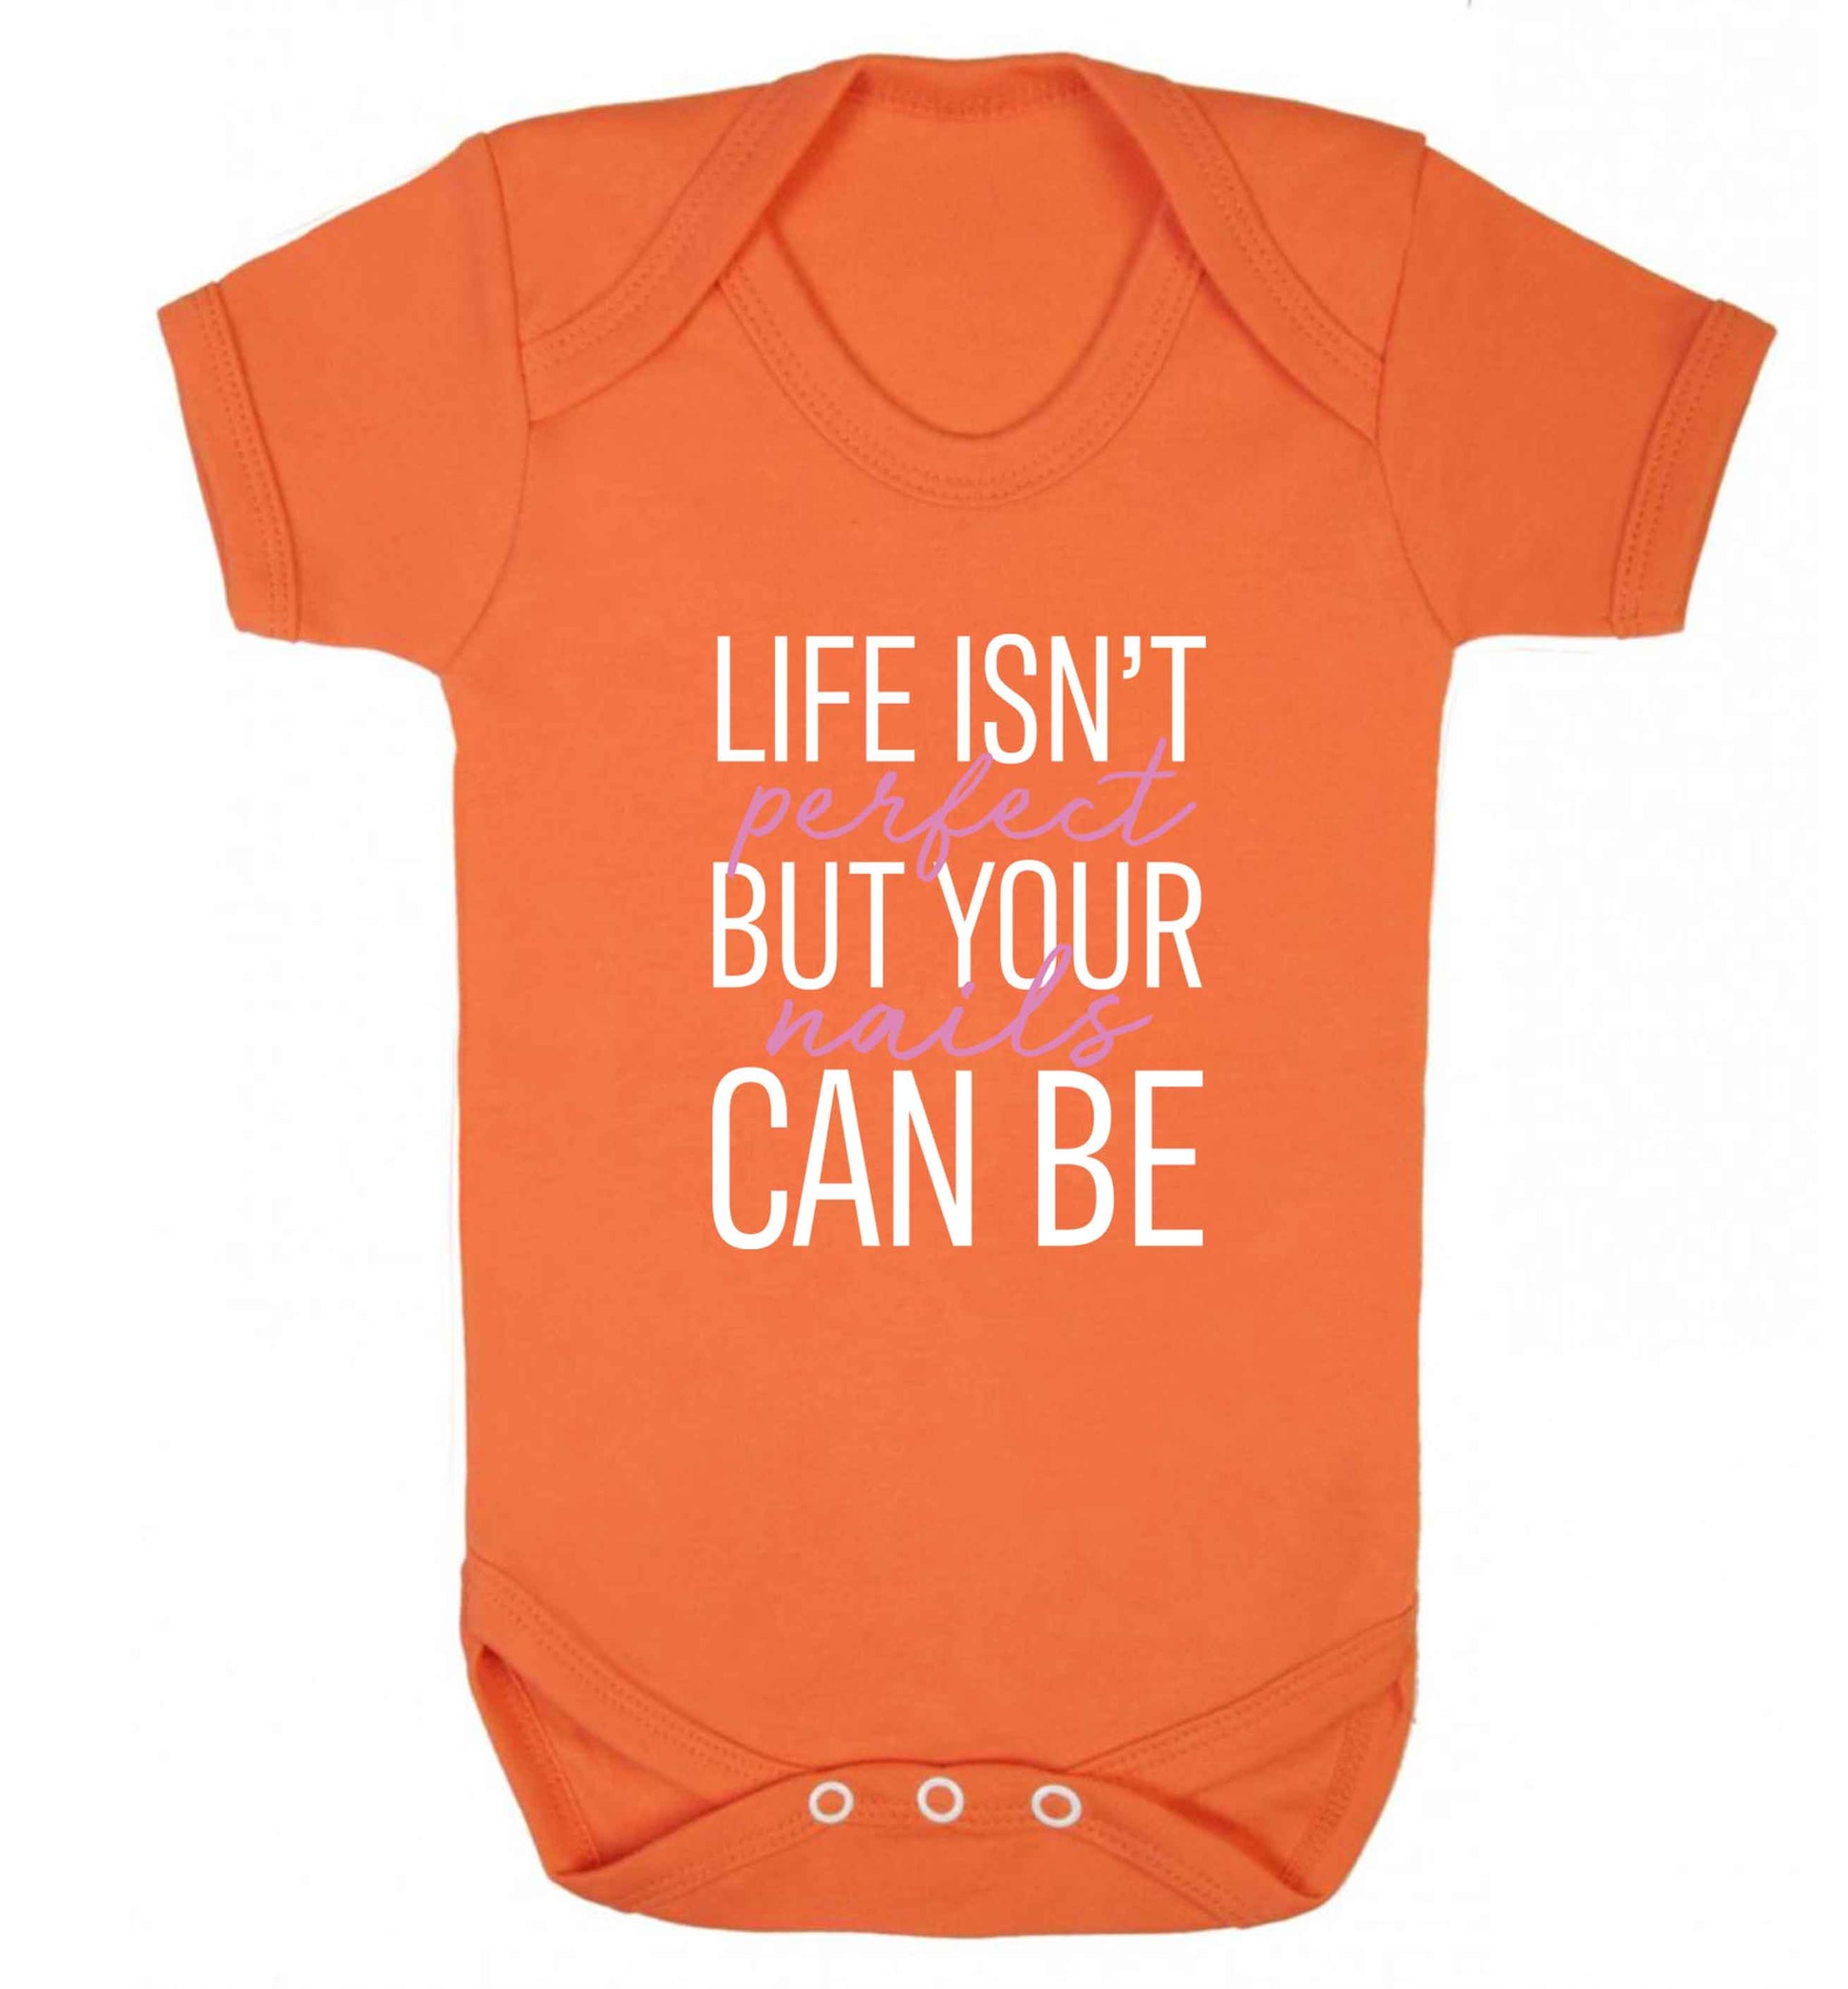 Life isn't perfect but your nails can be baby vest orange 18-24 months